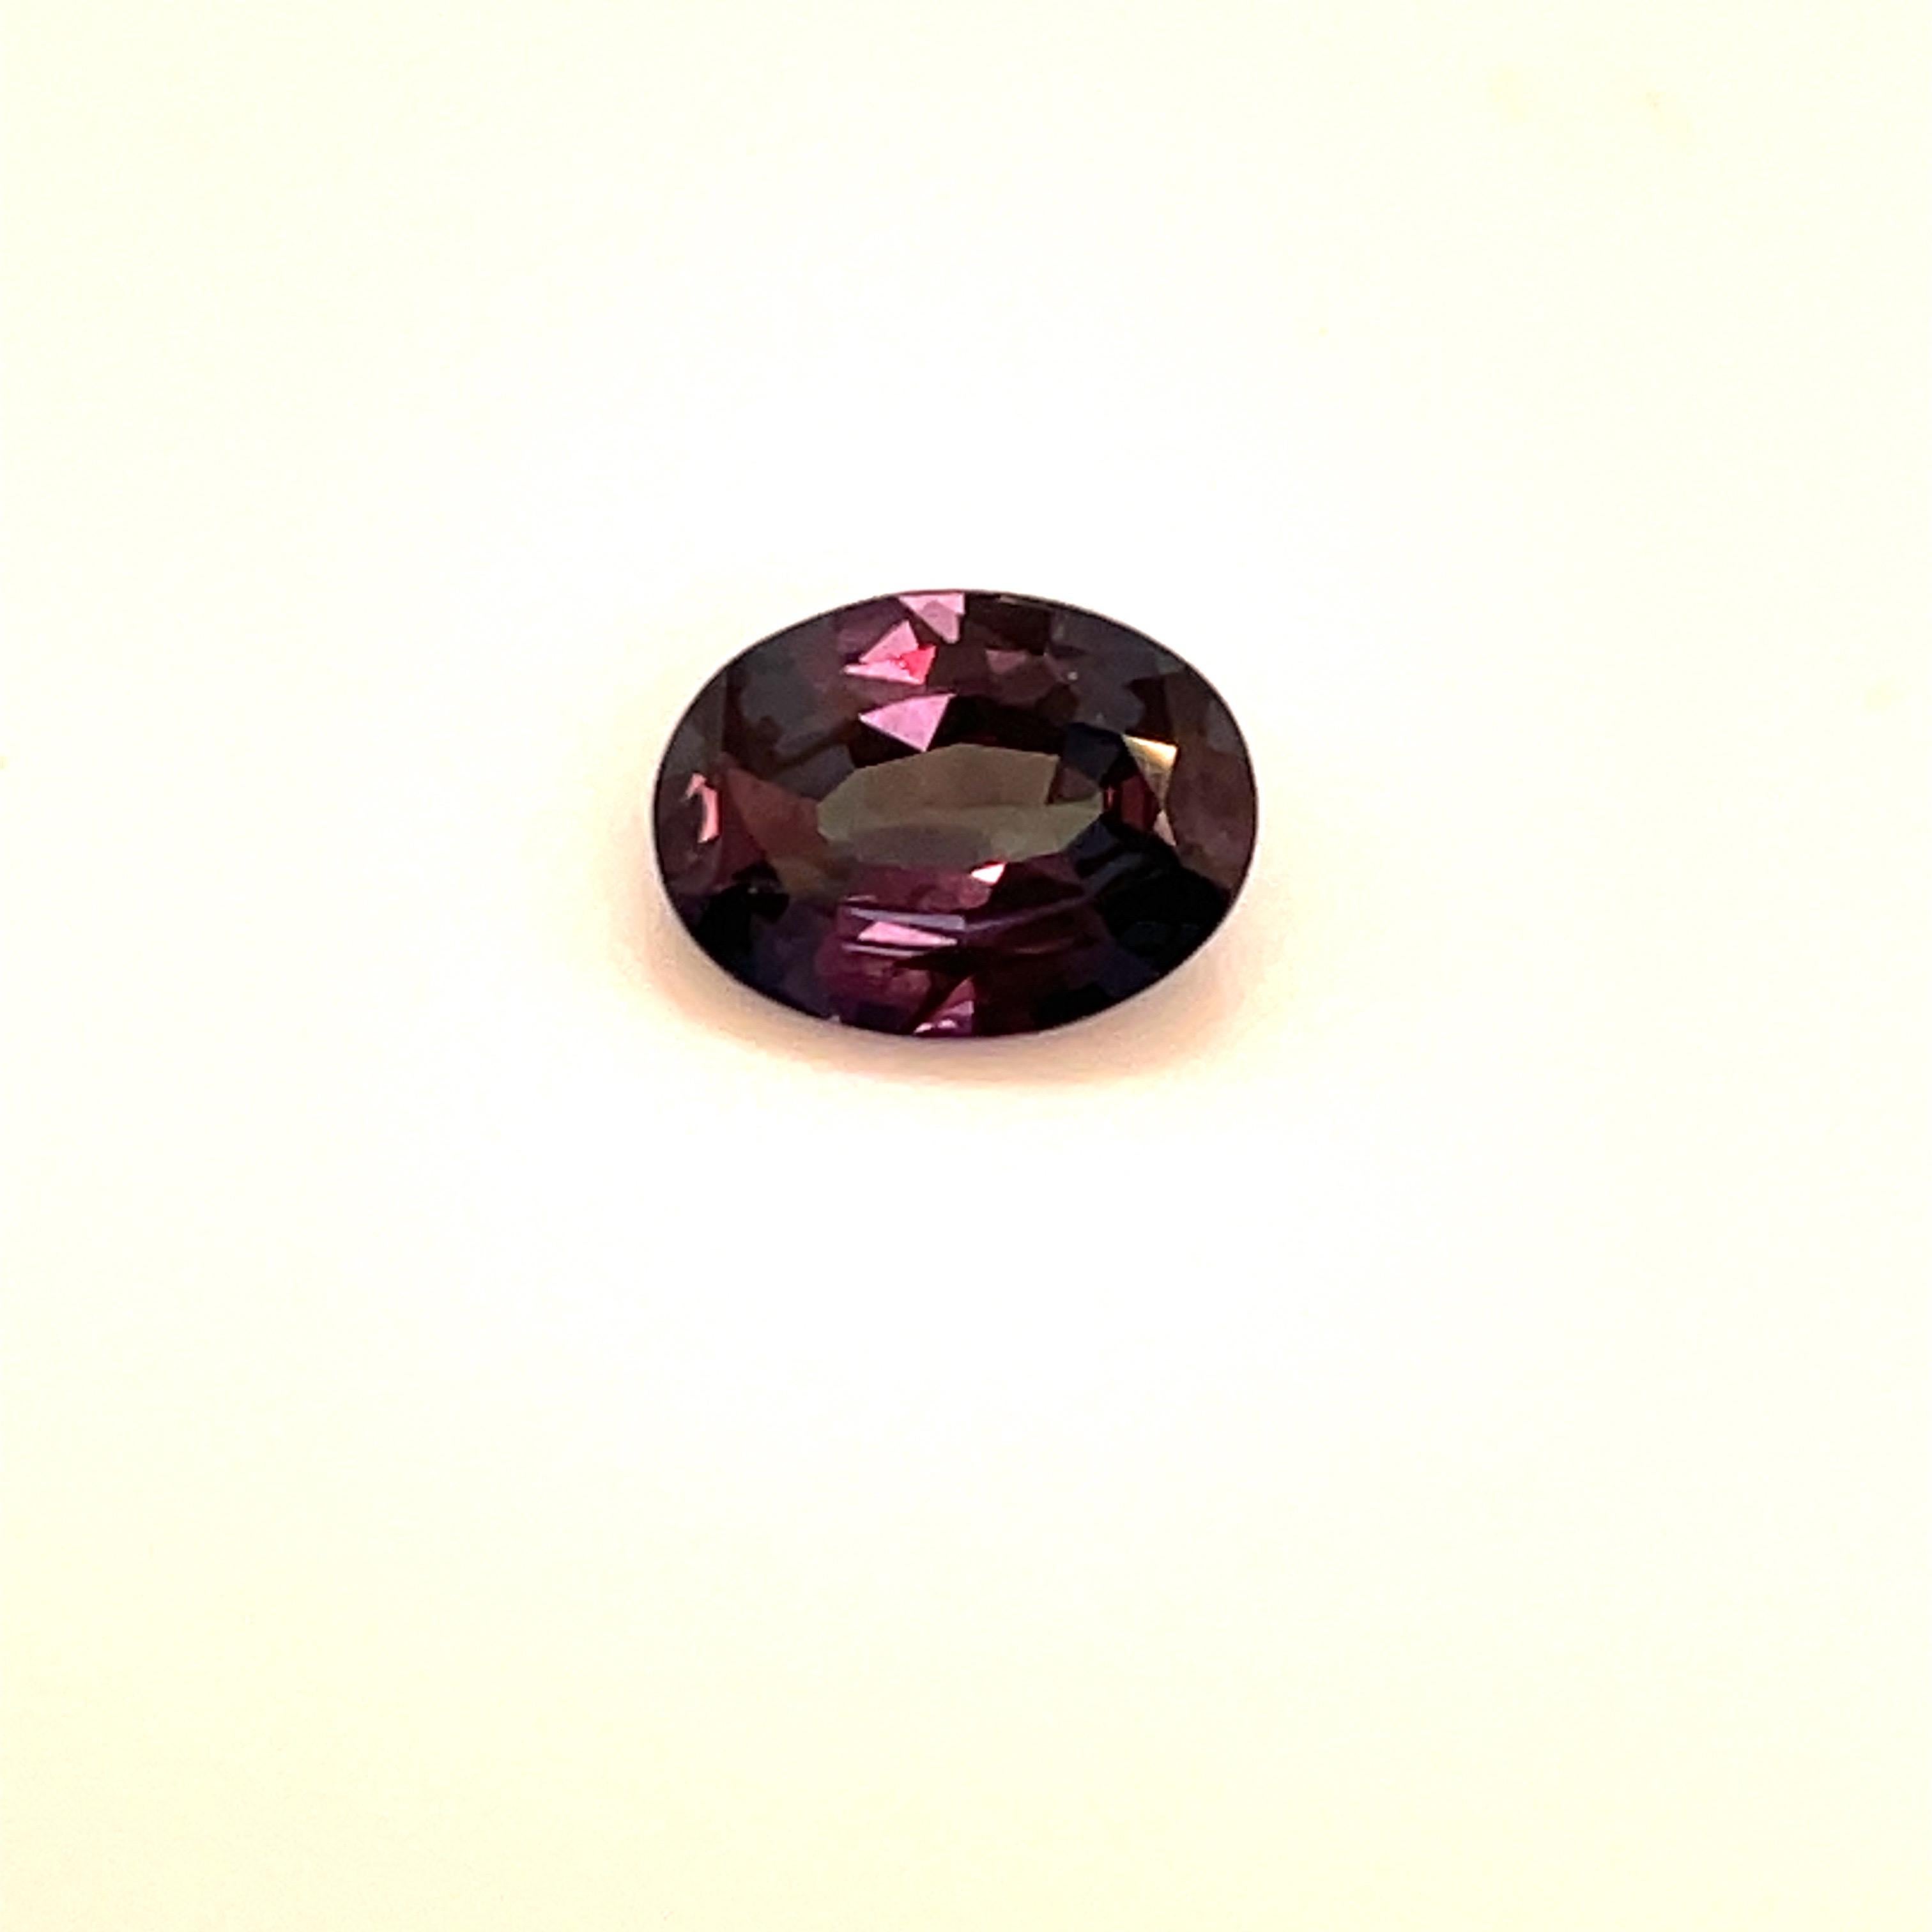 A lovely 1.57 Carat oval shape Alexandrite. Can be set in a ring or pendant. 
More shapes and sizes available. 
Email for inventory. 